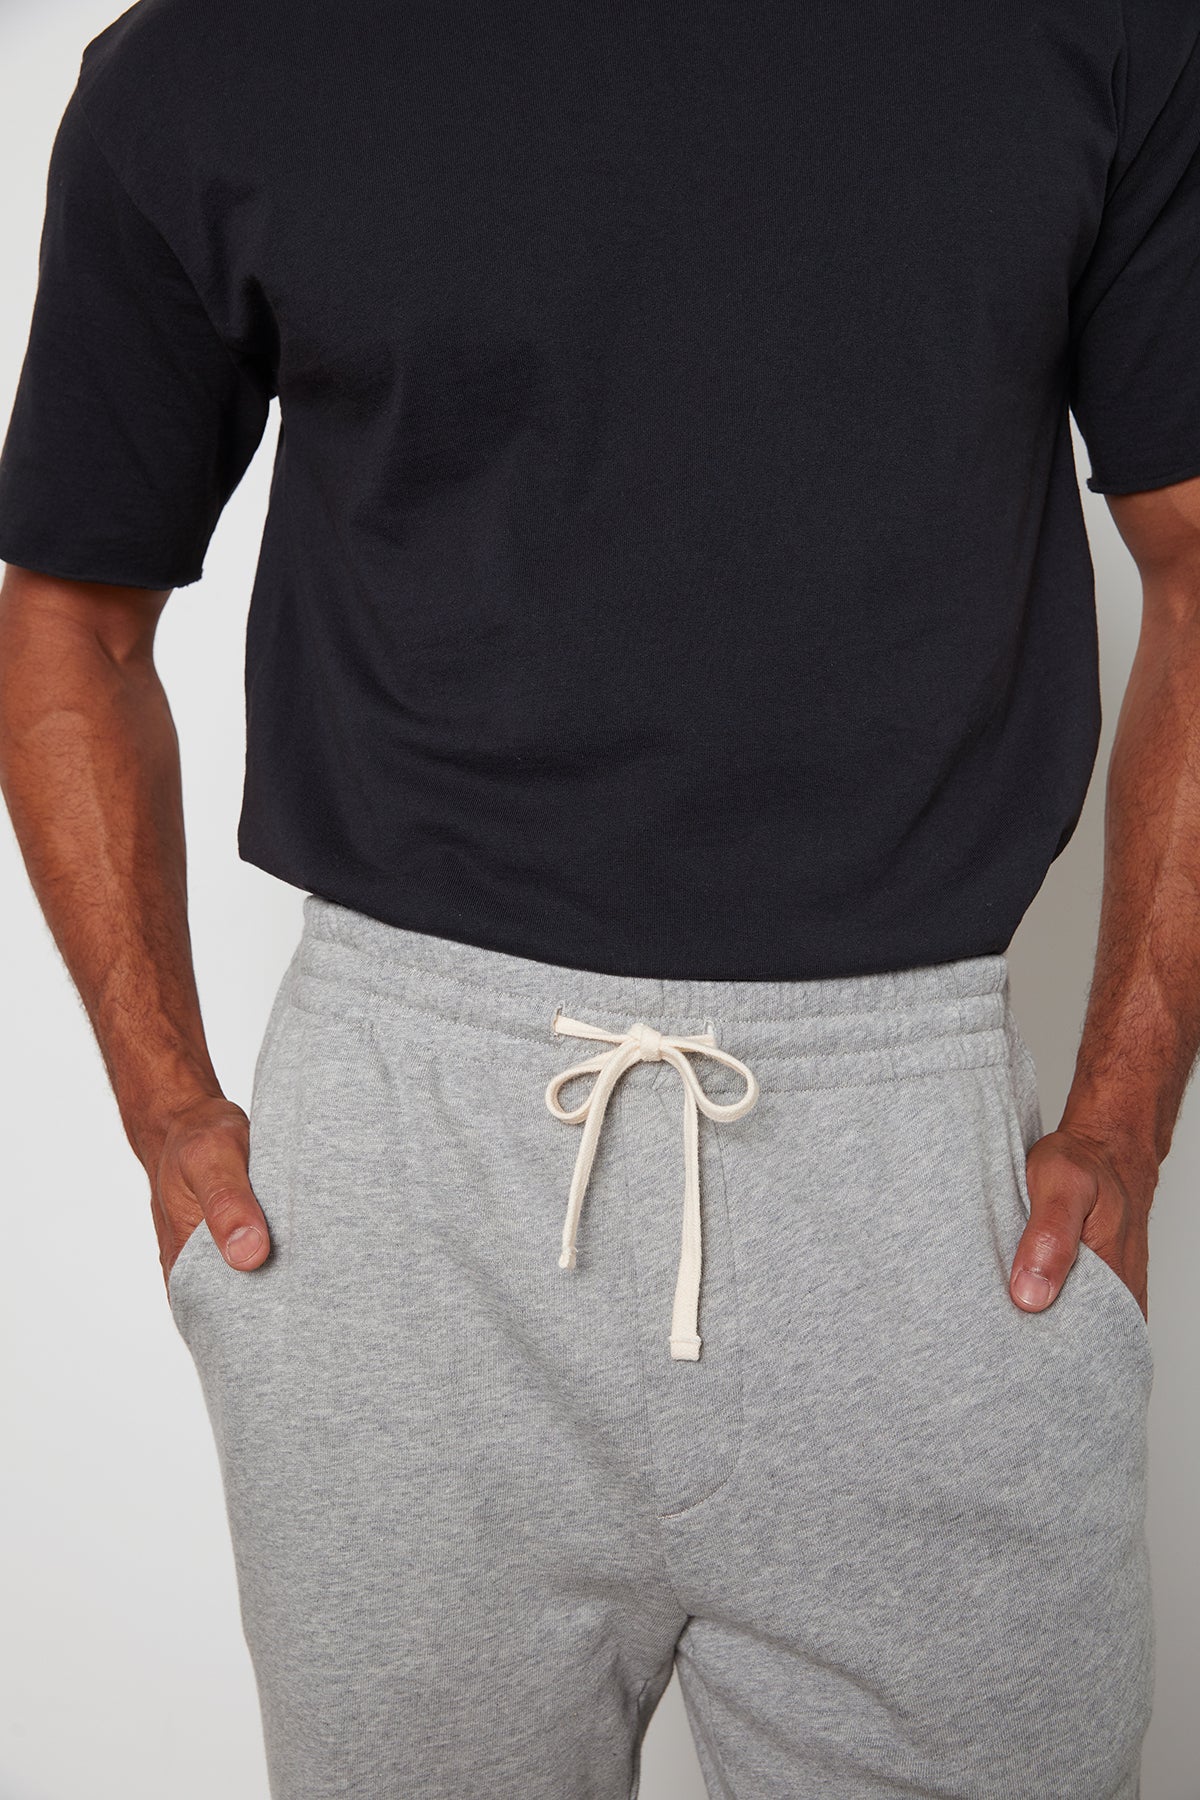 A man wearing a Velvet by Graham & Spencer JUDAS SWEATPANT with an elastic waist.-24522873897153